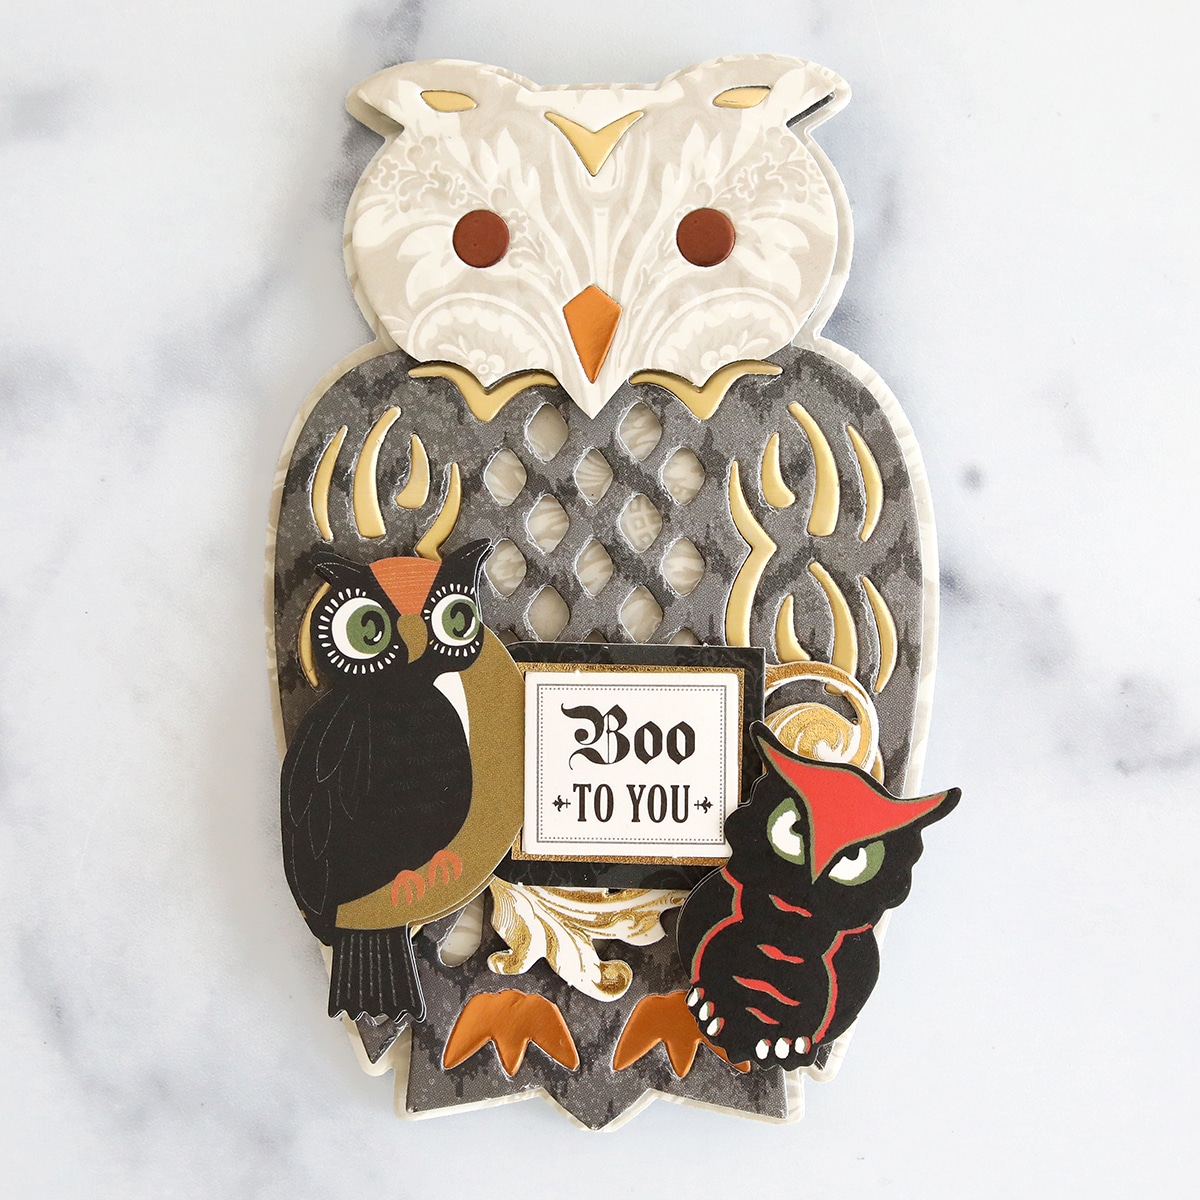 An owl and two owls on a marble surface.